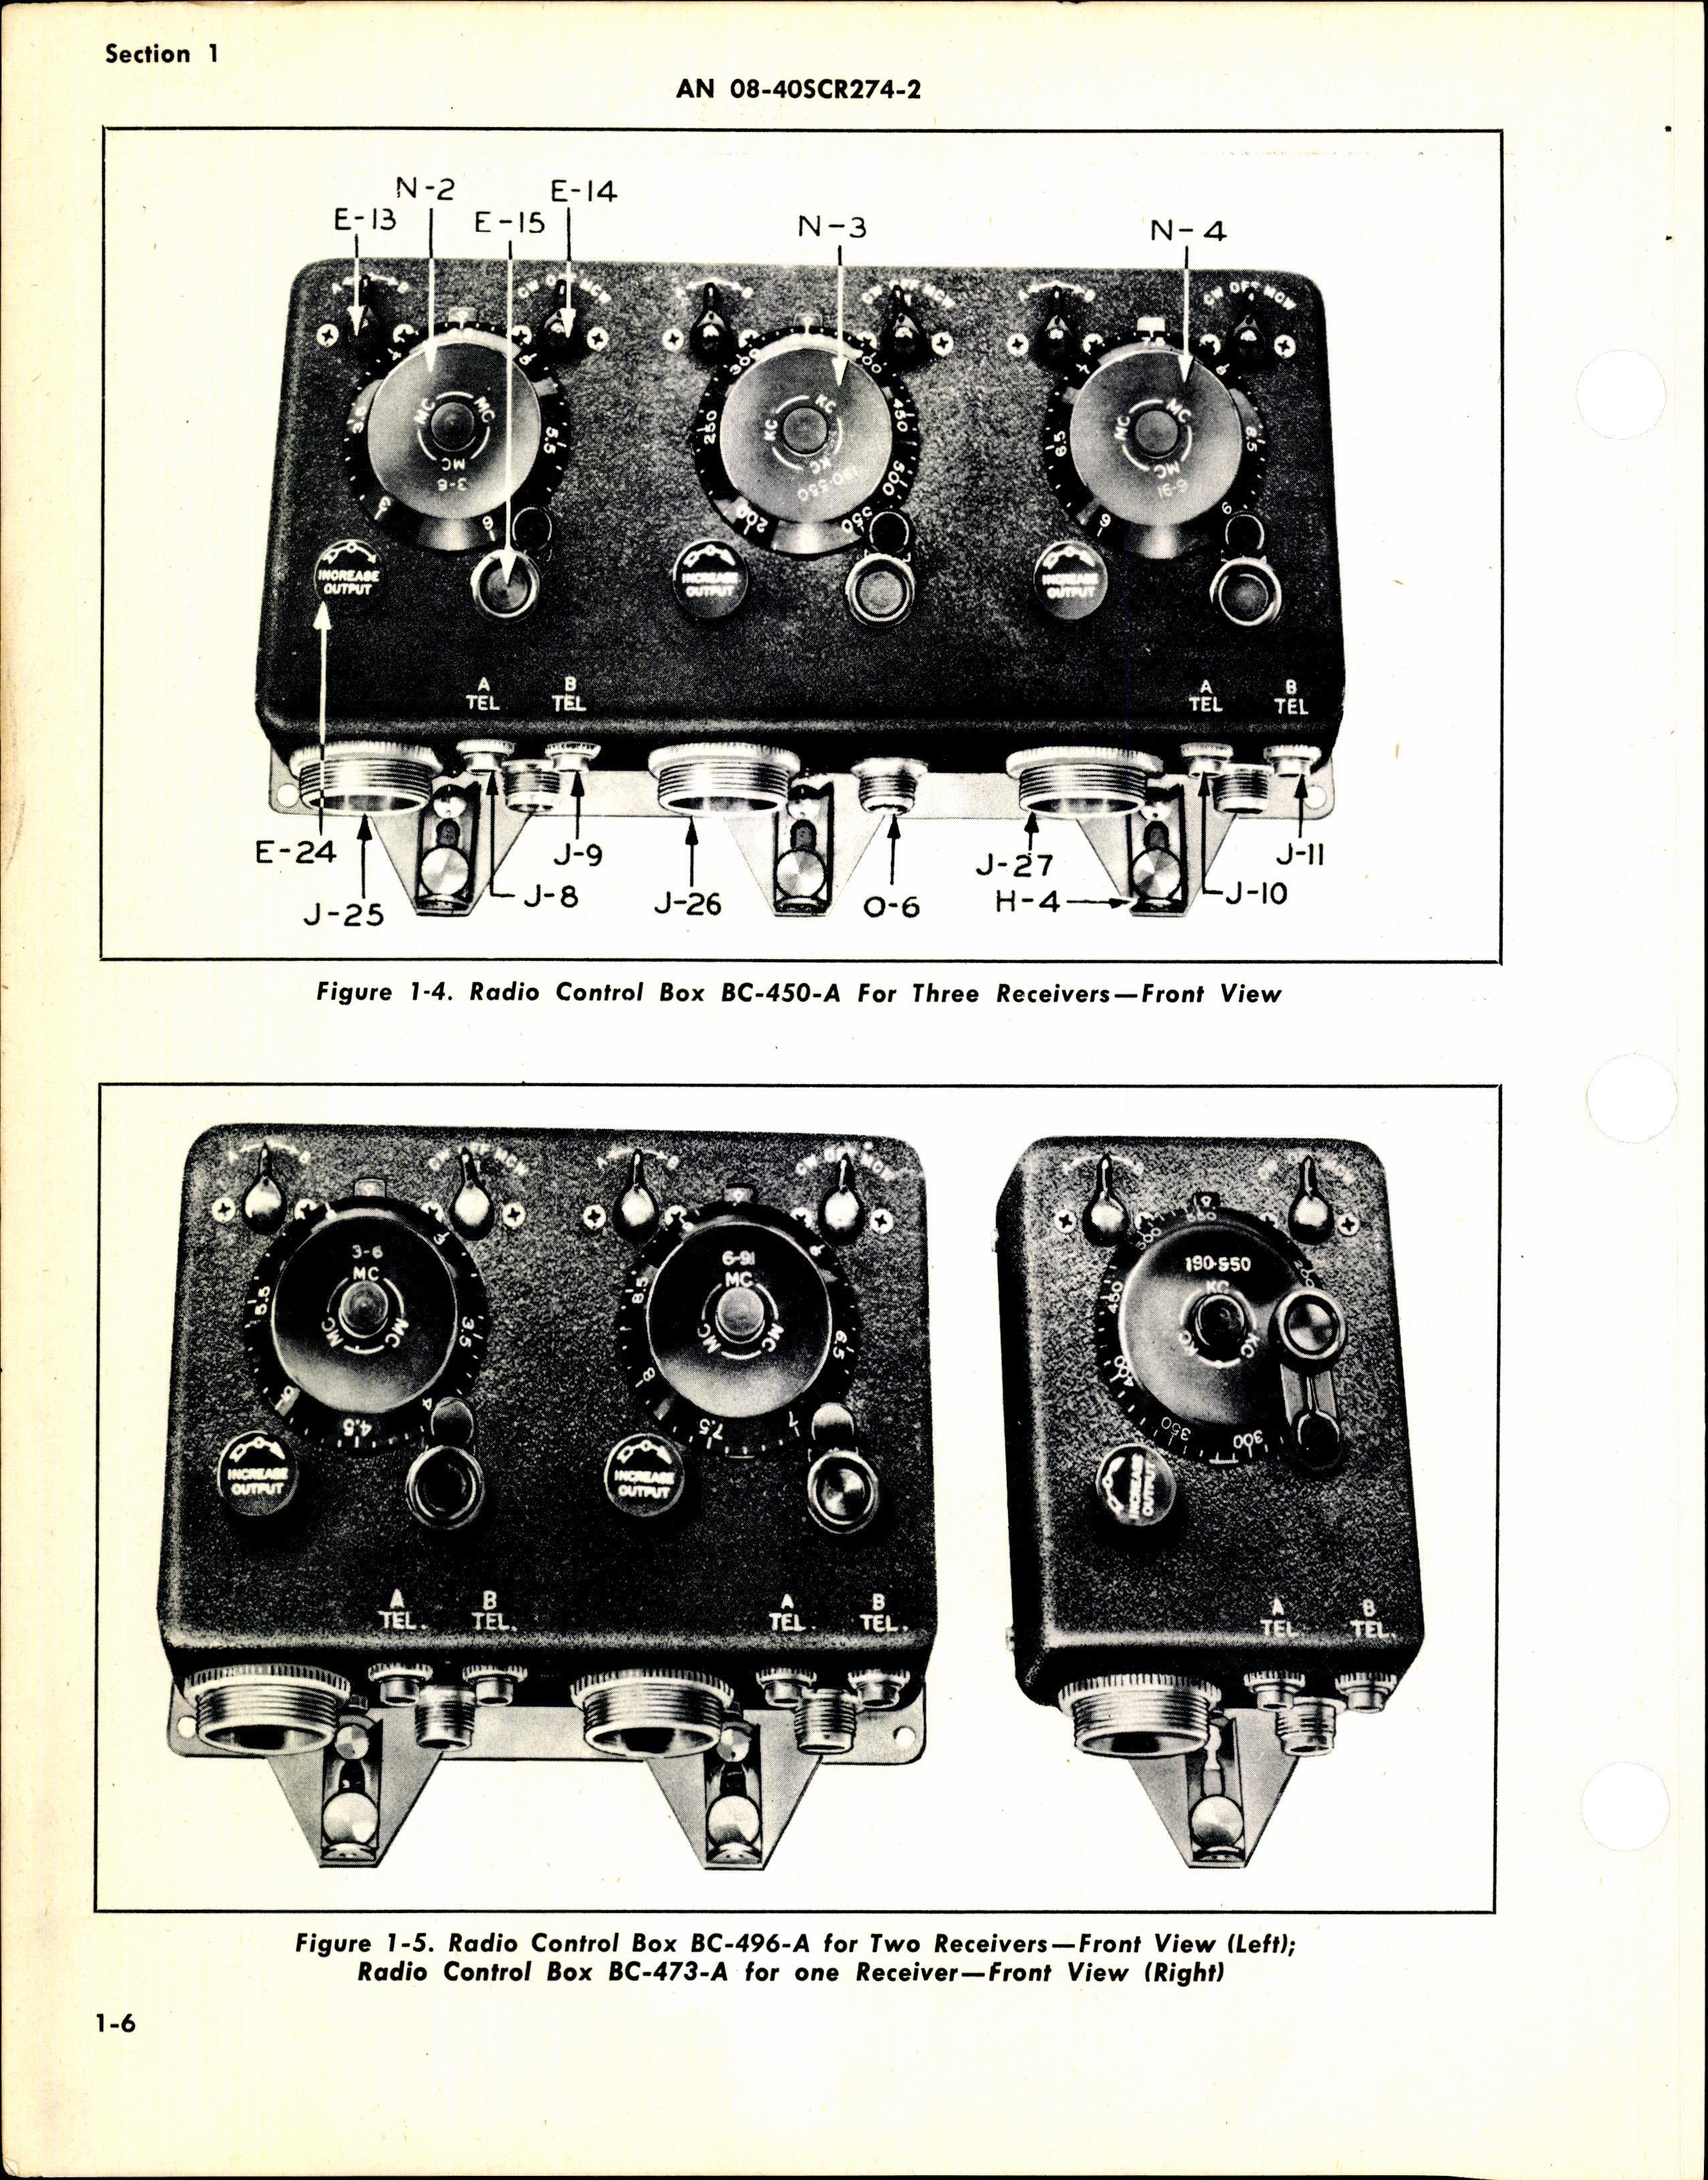 Sample page 12 from AirCorps Library document: Handbook Operating Instructions for Radio Set SCR-274-N